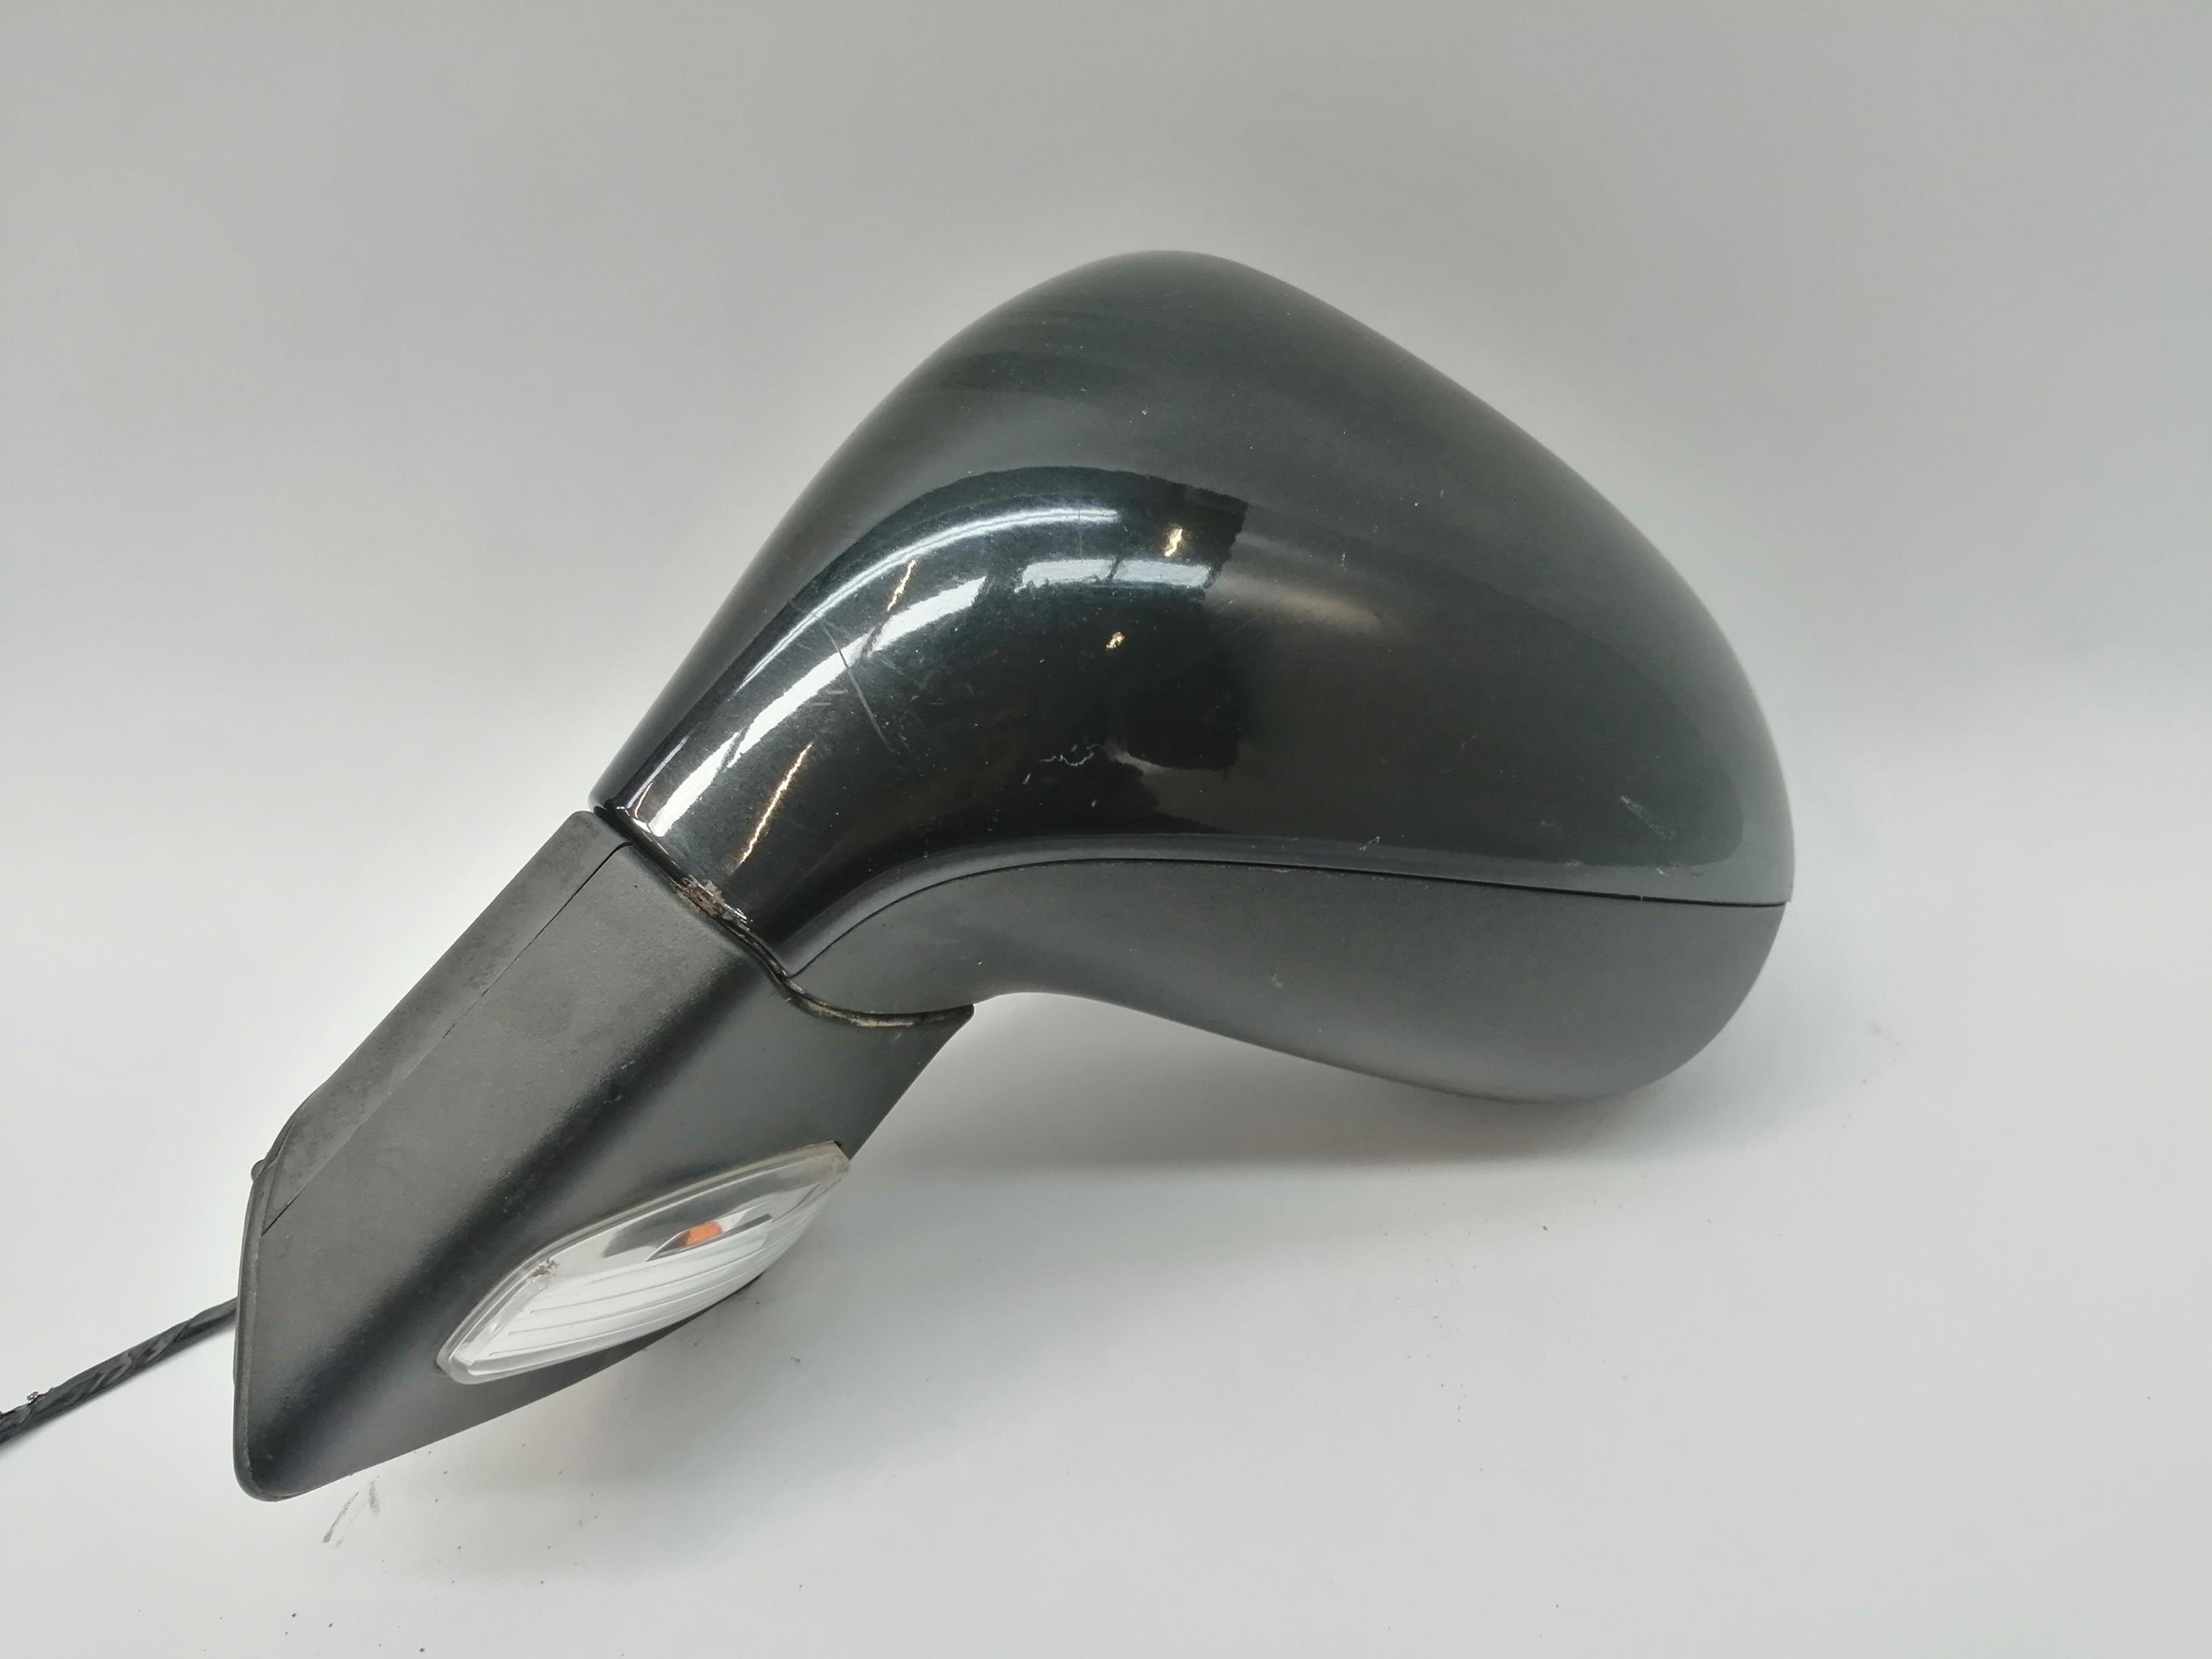 PEUGEOT 207 1 generation (2006-2009) Left Side Wing Mirror 96806498XT, 52CABLES, 8149ZG 23088931